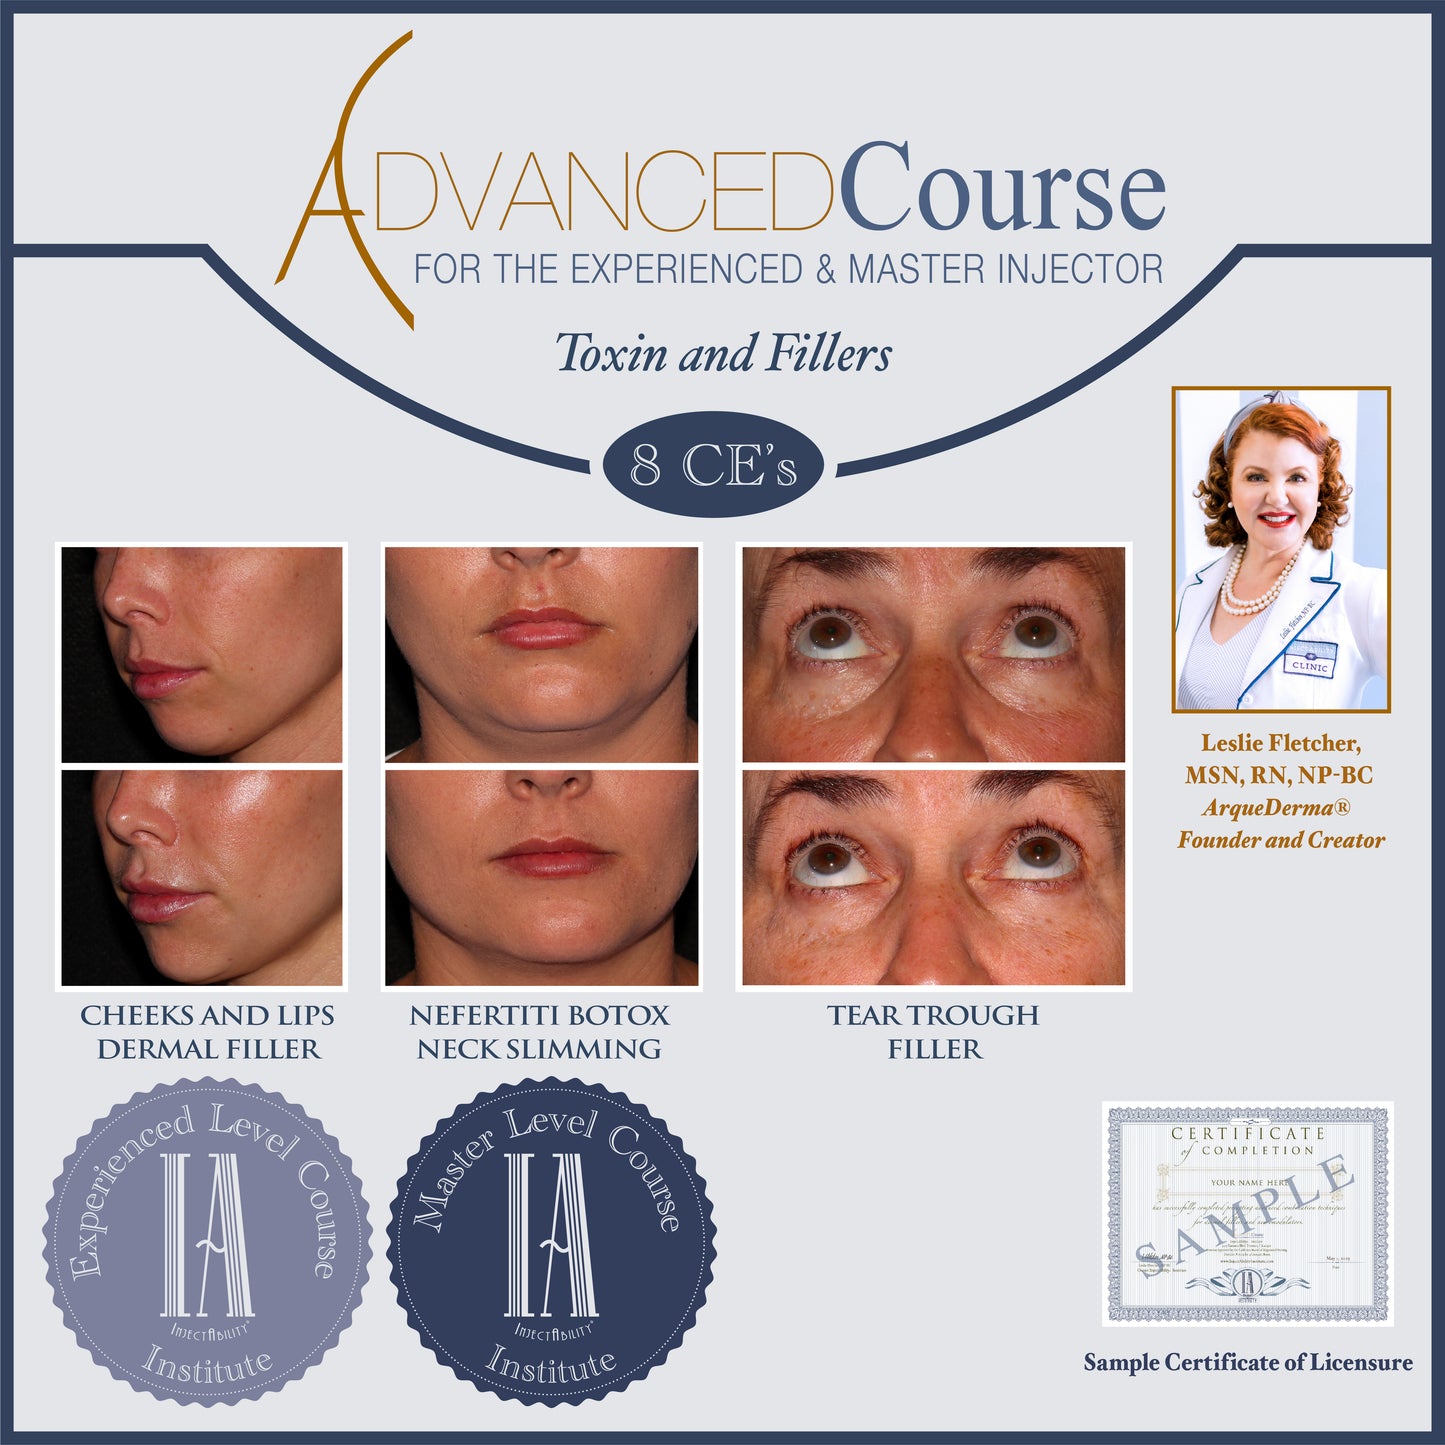 Advanced Combination Course for Toxins and Fillers